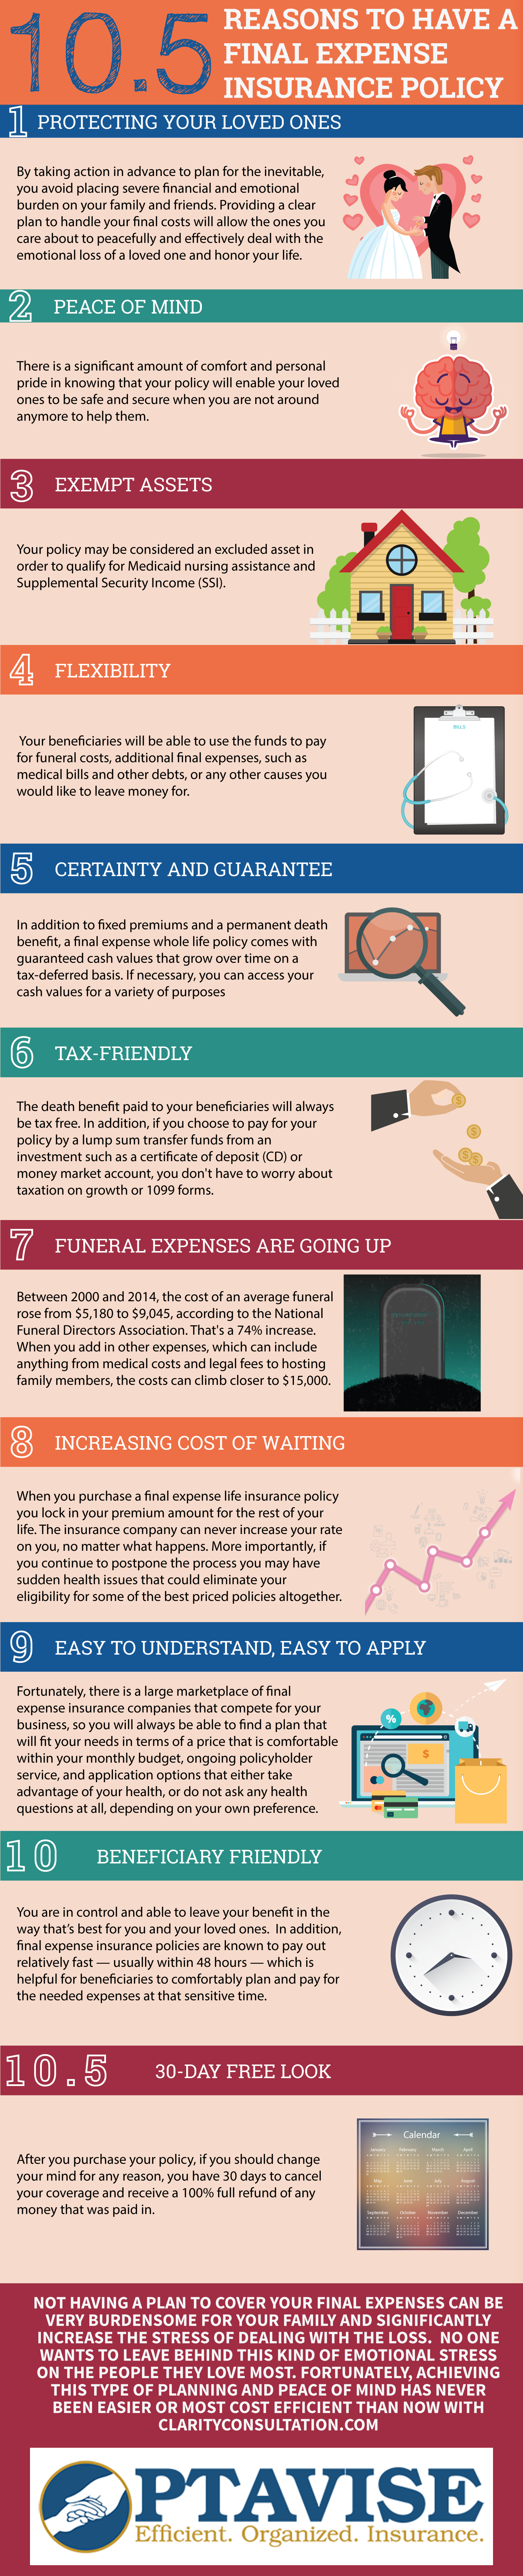 10.5 Reasons to Have a Final Expense Plan